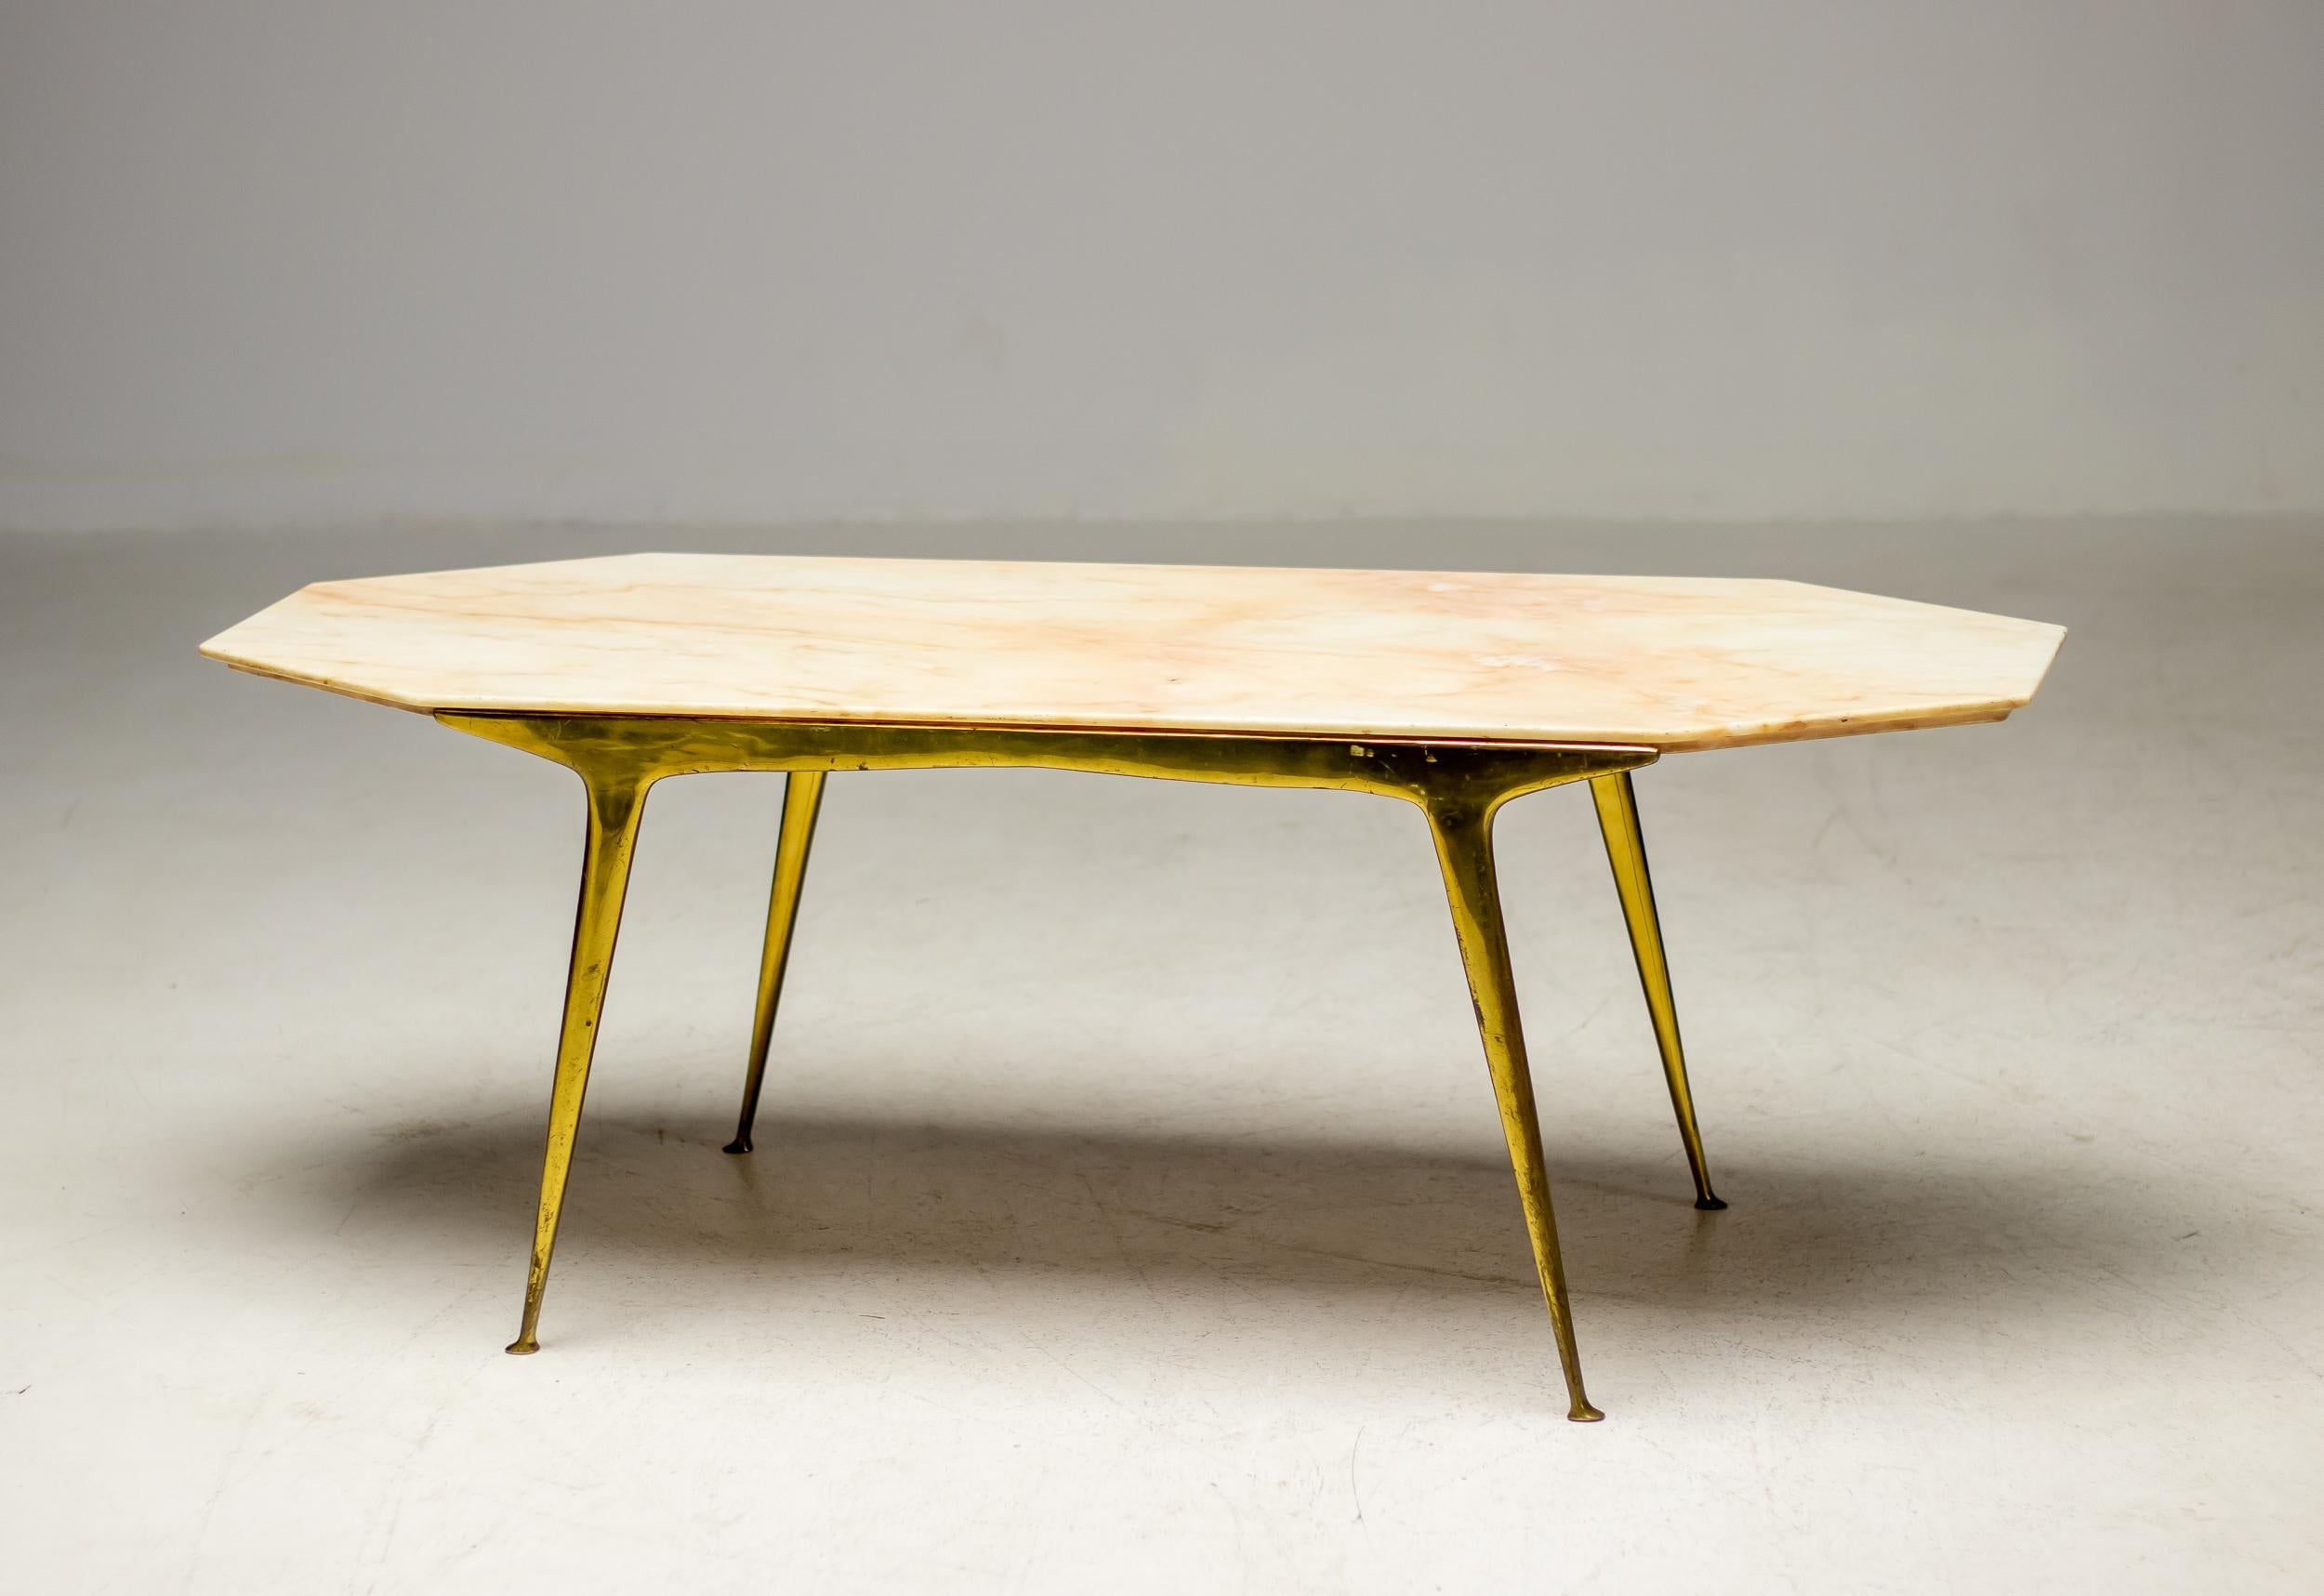 Very elegant Italian 1950's coffee table with a polished brass base and marble top.
Excellent Italian craftsmanship and still in wonderful vintage condition with just the right amount of patina.
Reminiscent of the work of Carlo Mollino, we couldn't